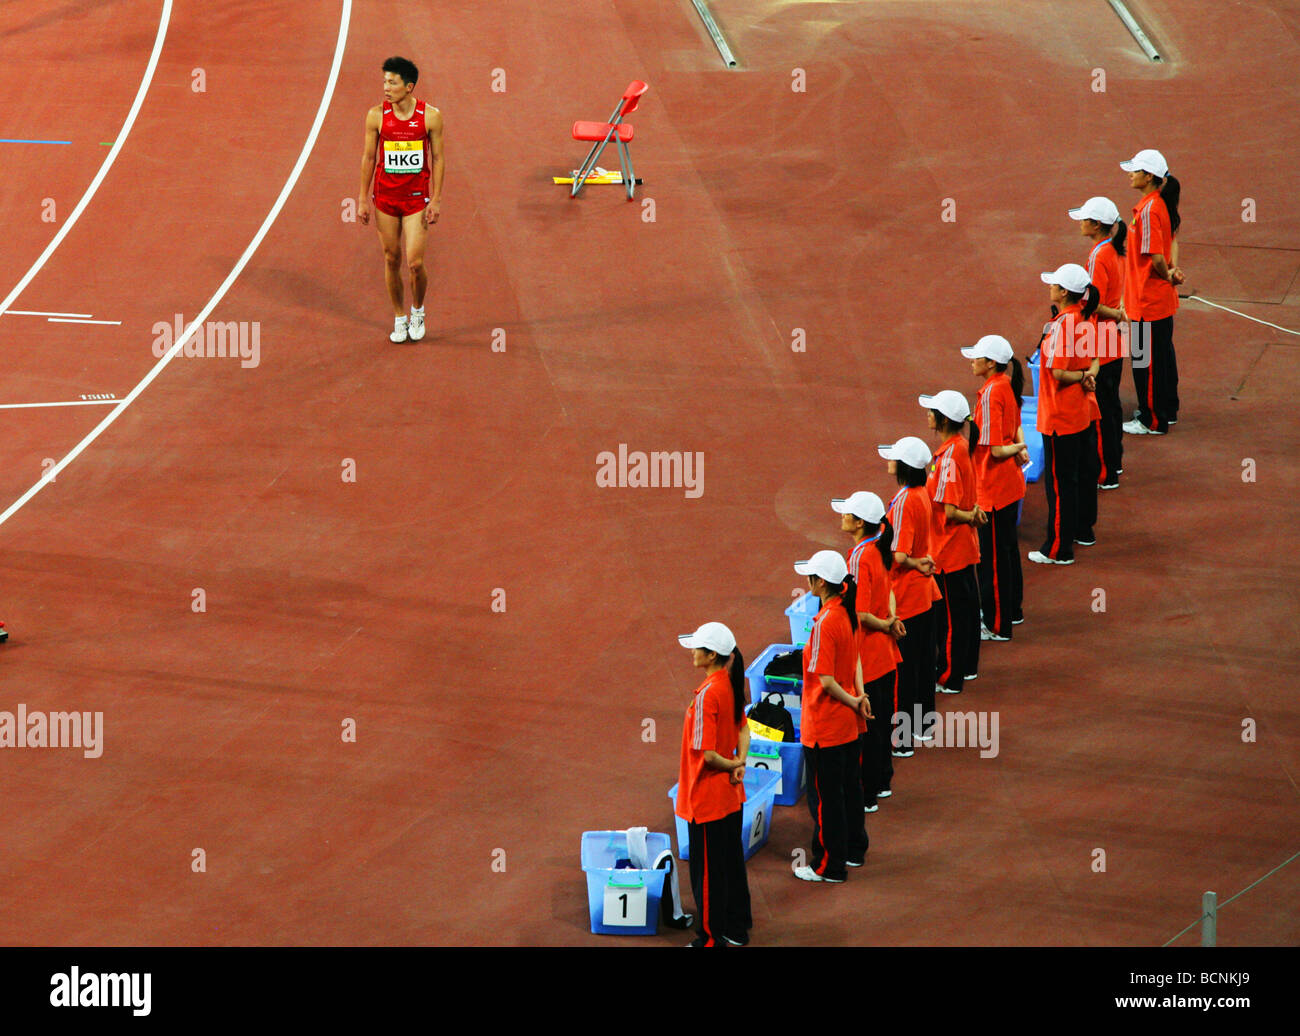 An athelete from Hong Kong walks pass a row of janitors, Beijing, China Stock Photo